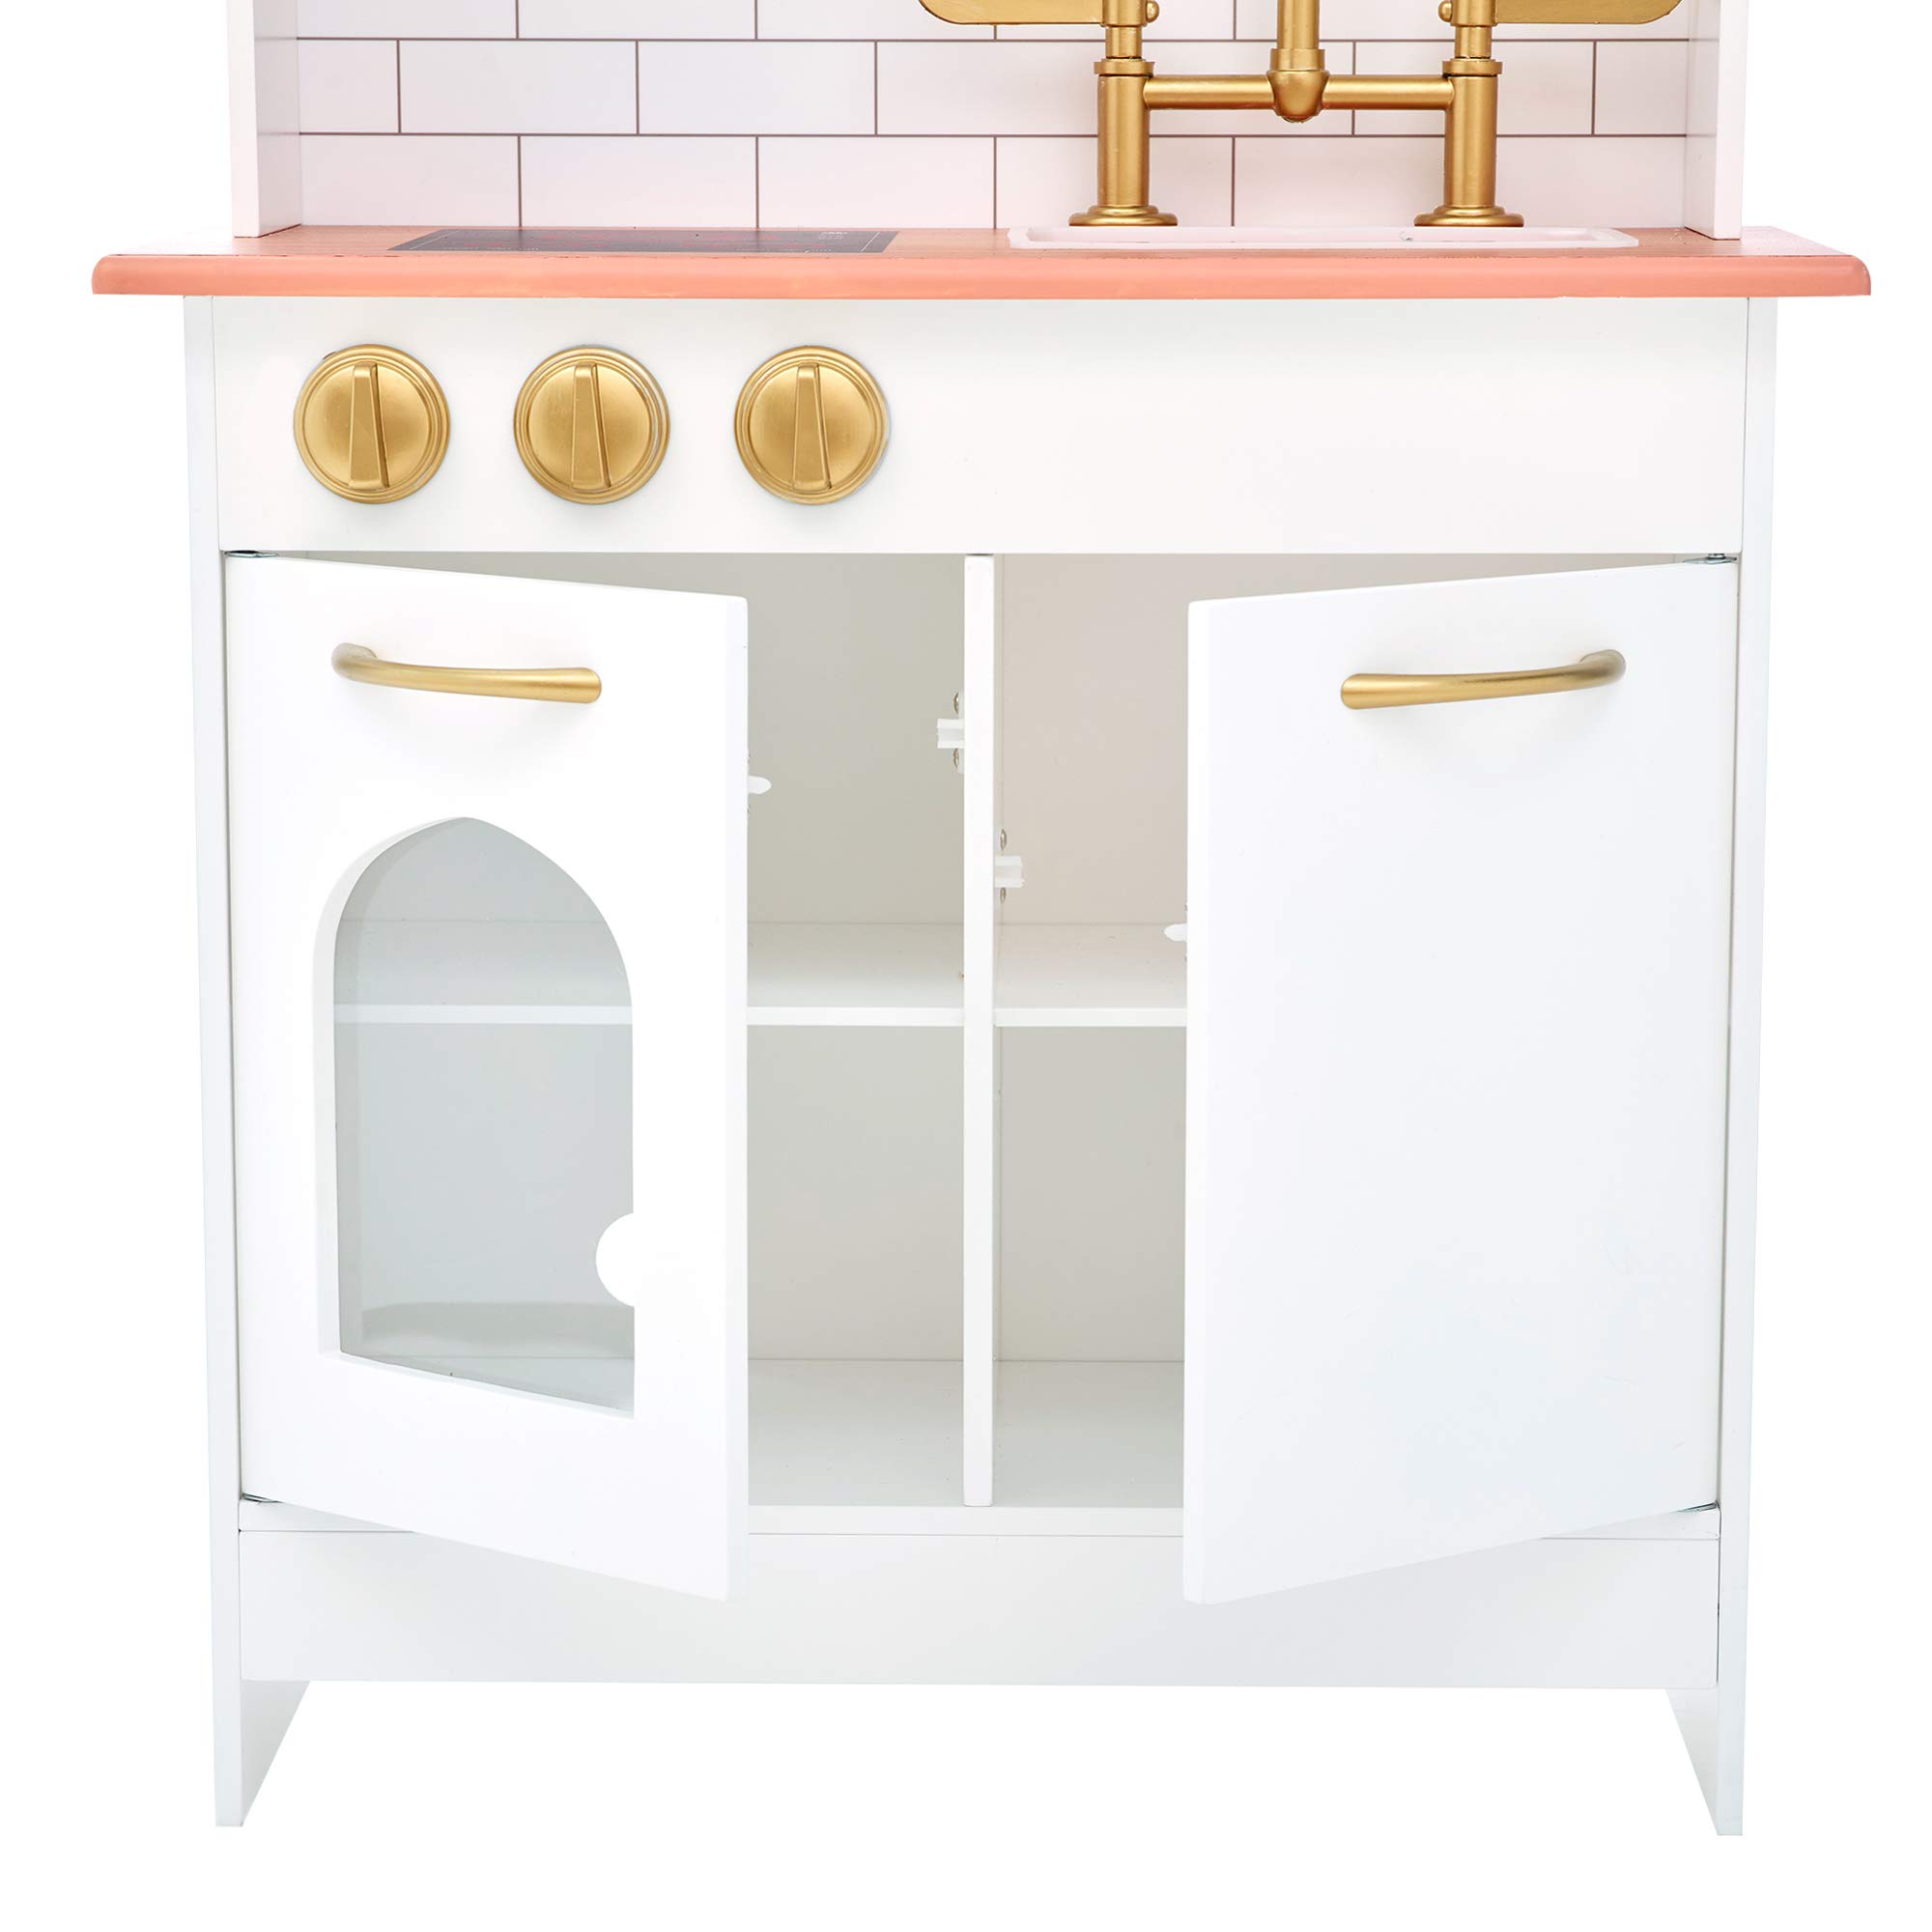 Teamson Kids Little Chef Boston Kids Play Kitchen Set with Play Phone & Cookware, Small Play Kitchen with Subway Tile Backsplash, White/Gold